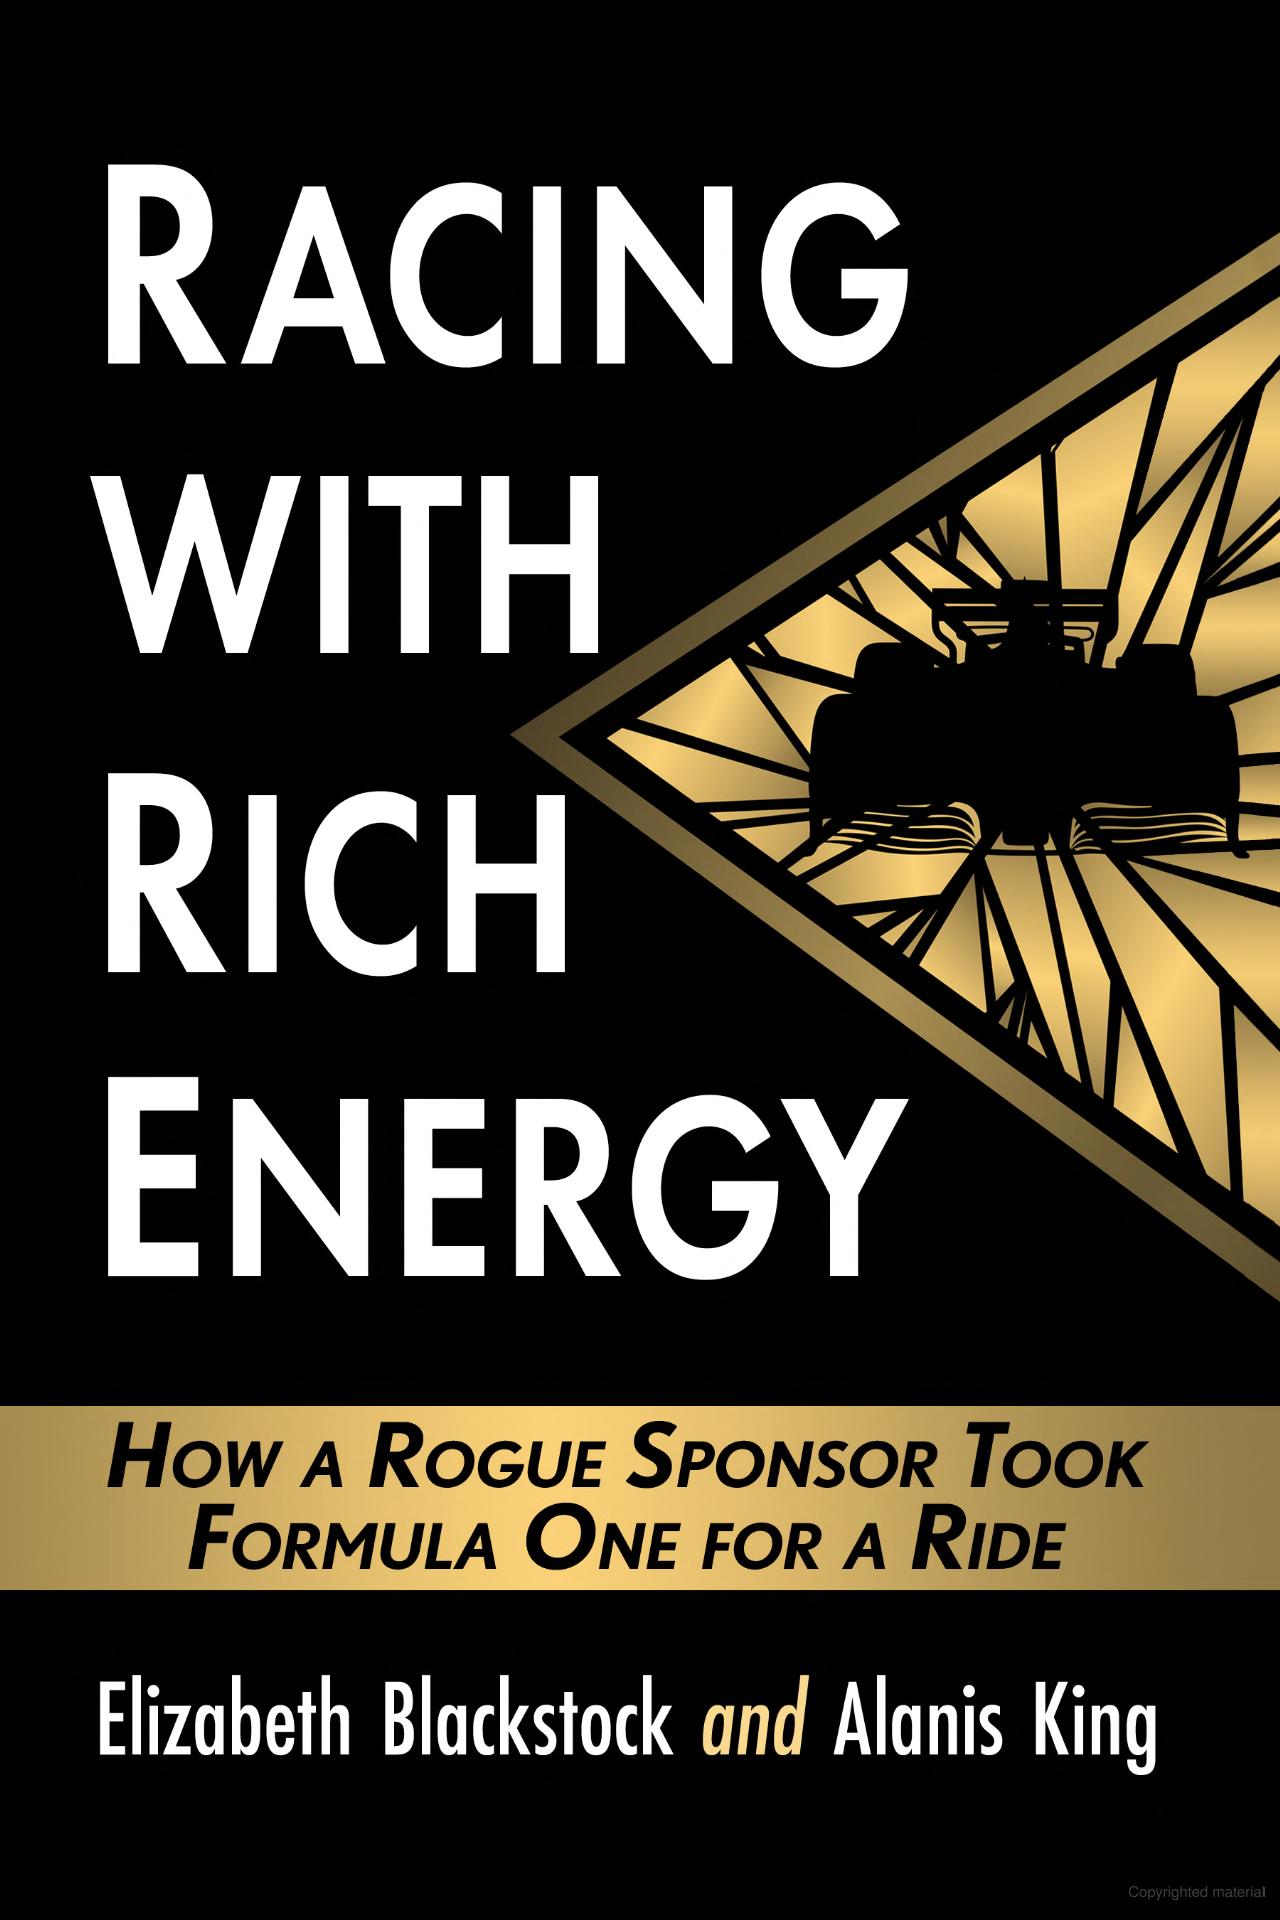 Elizabeth Blackstock, Alanis King: Racing with Rich Energy (2022, McFarland & Company, Incorporated Publishers)